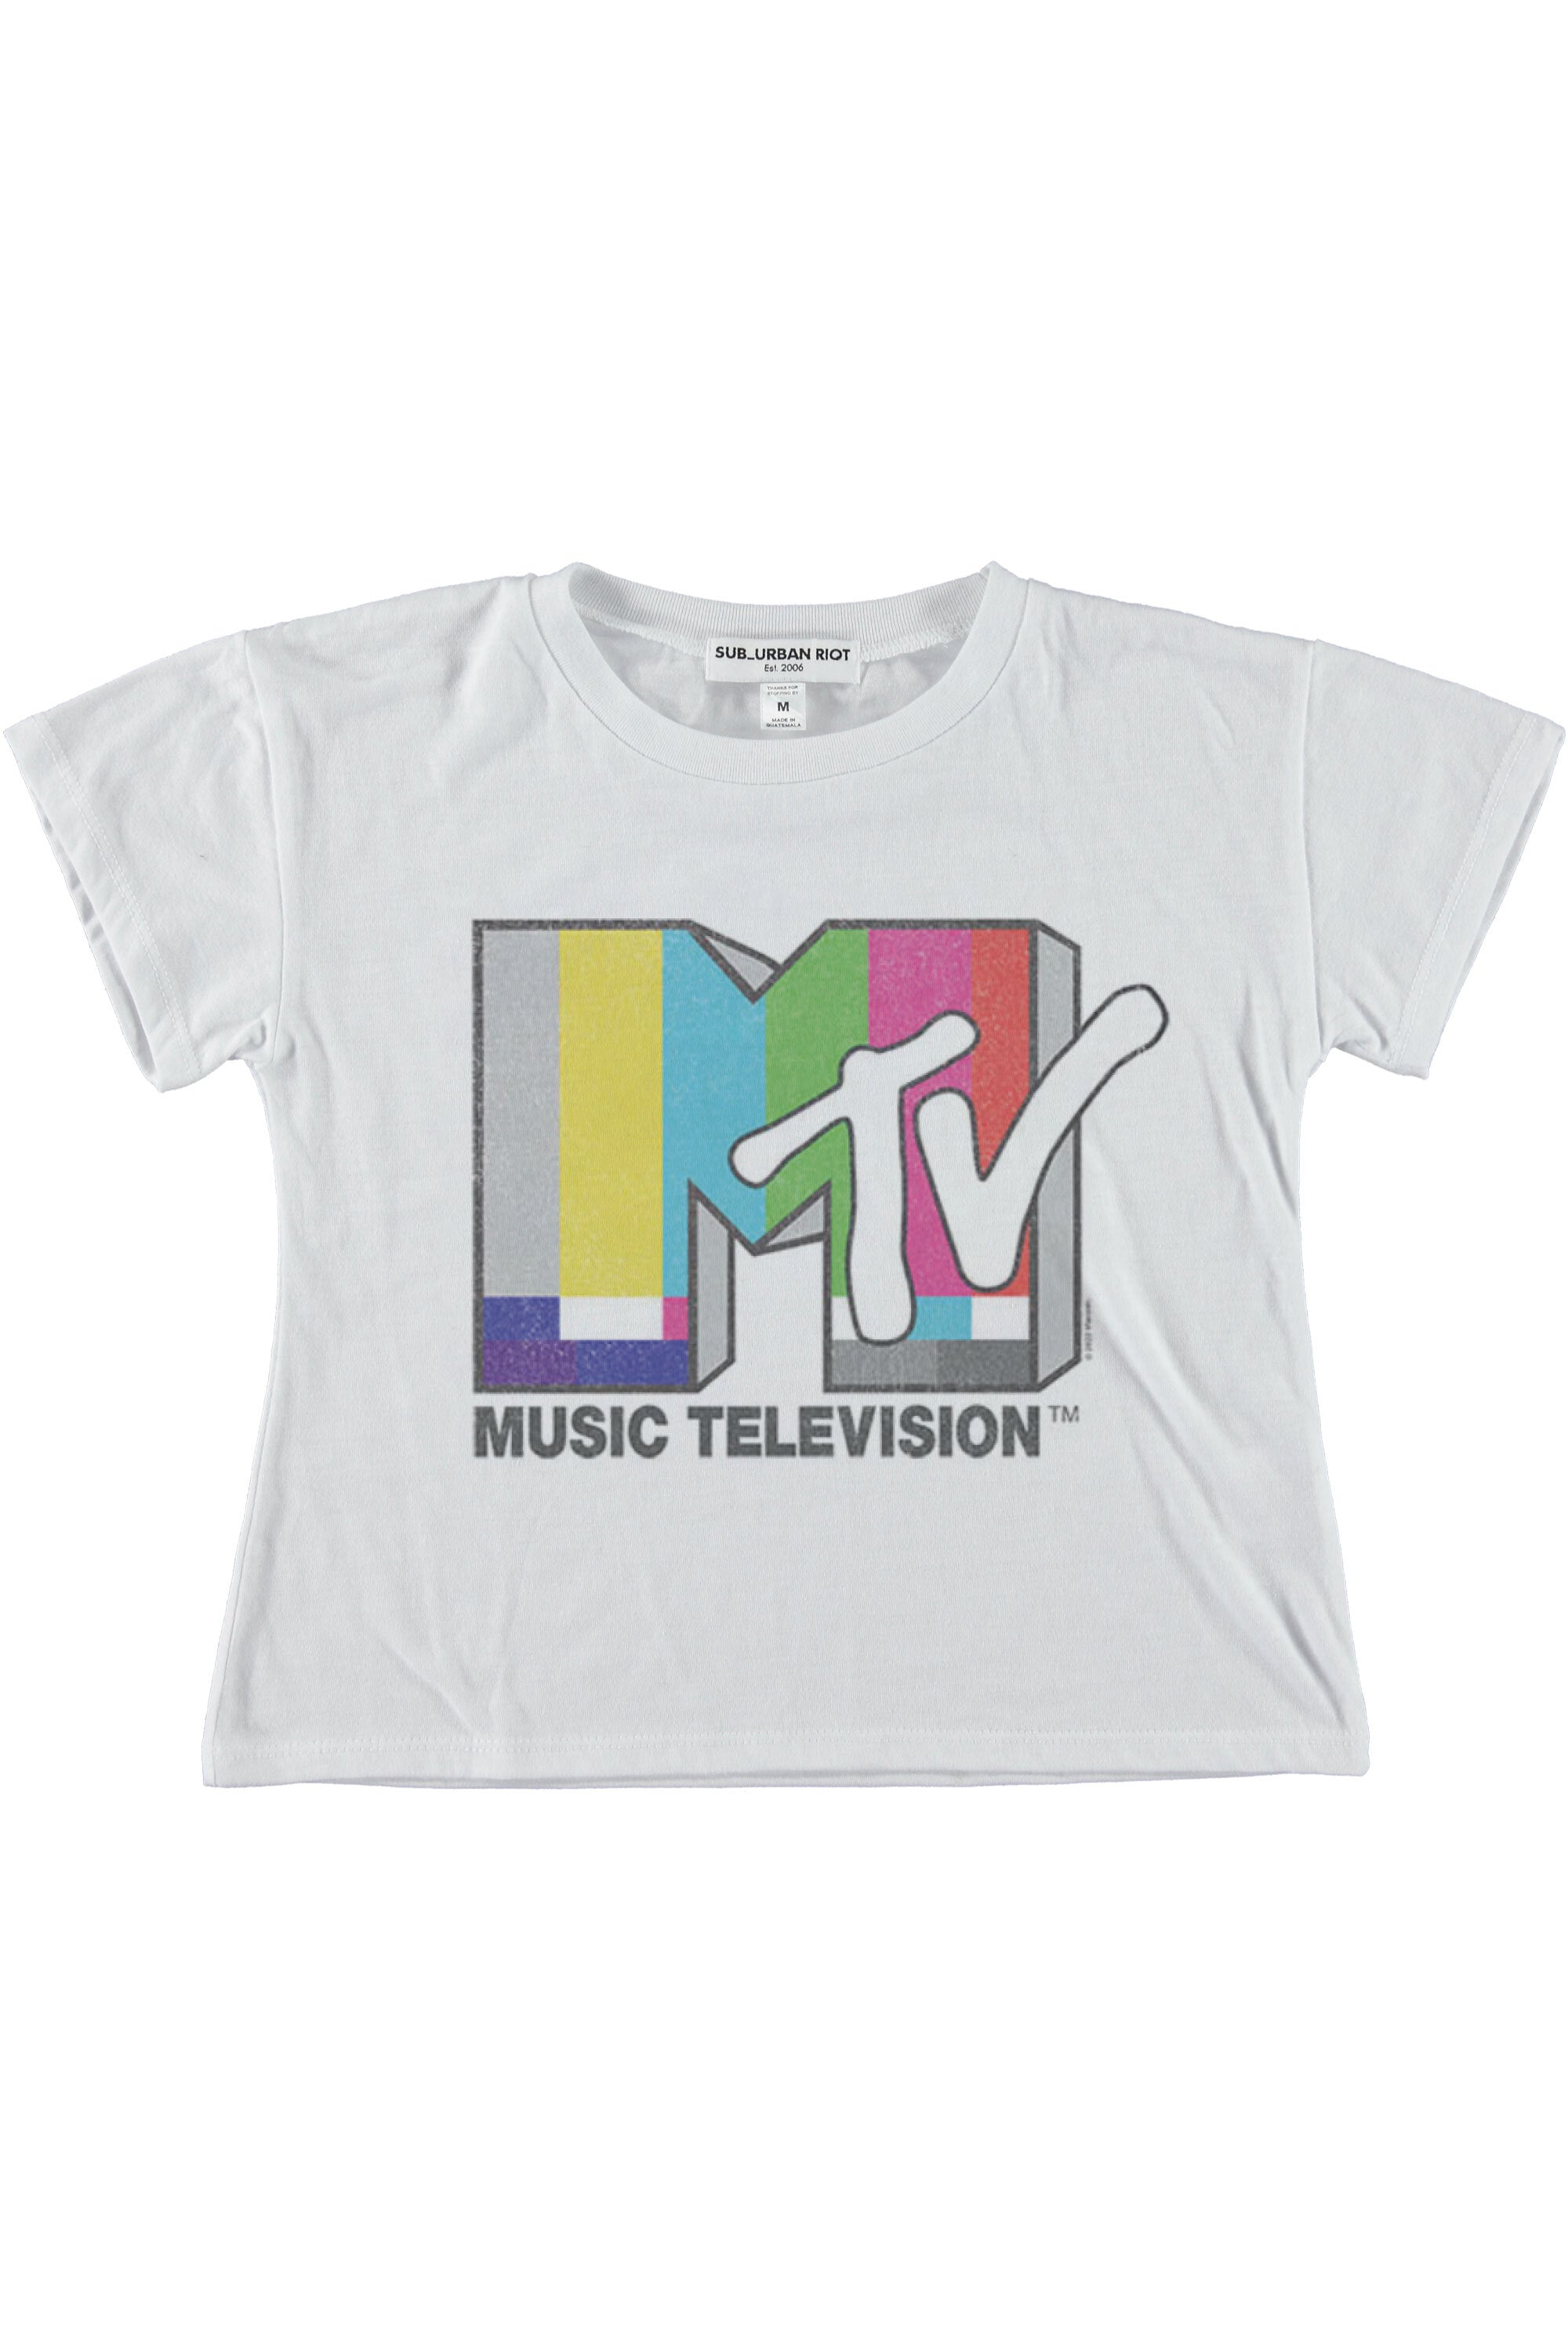 MTV STATIC YOUTH SIZE CROP TEE